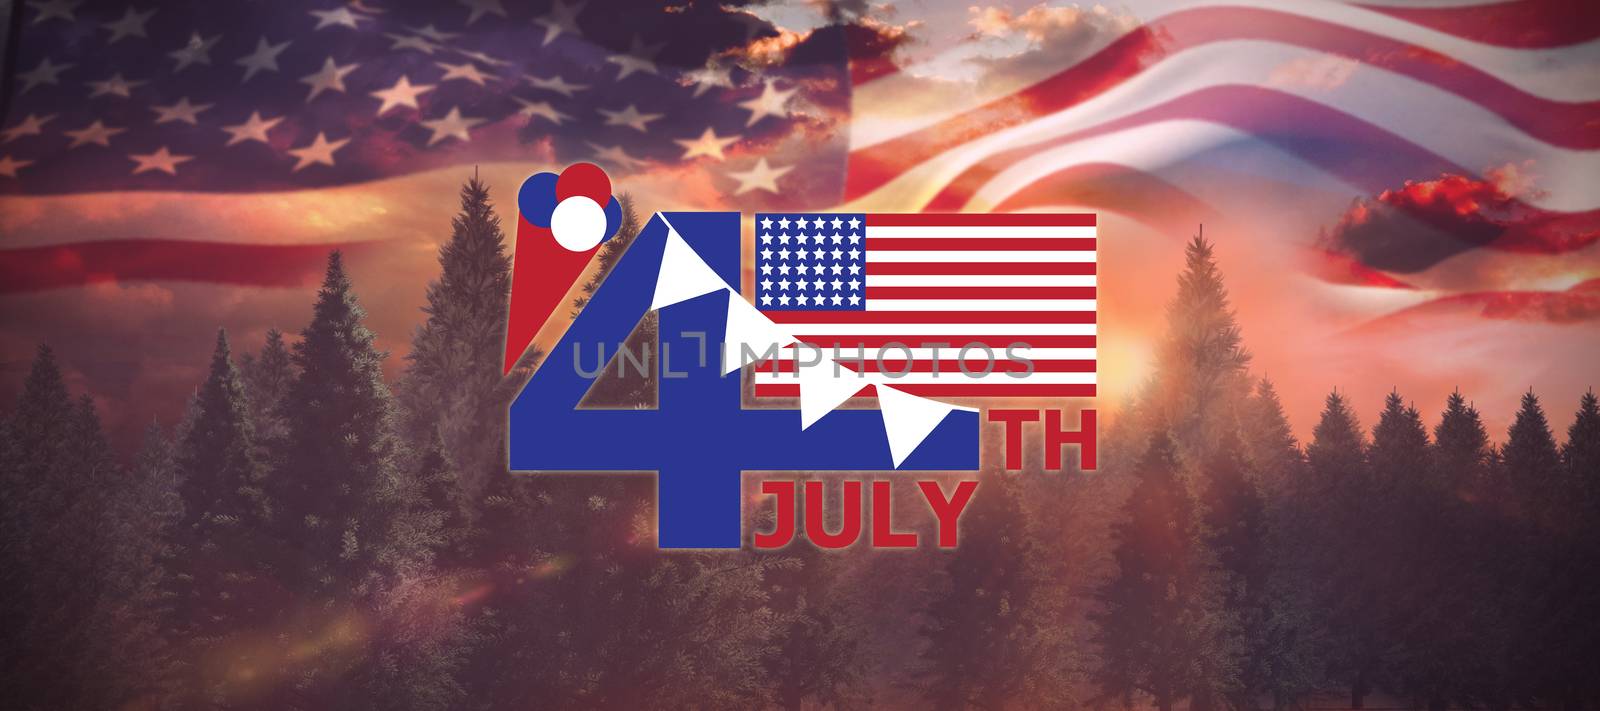 Vector image of 4th July text with flag and decoration  against country scene